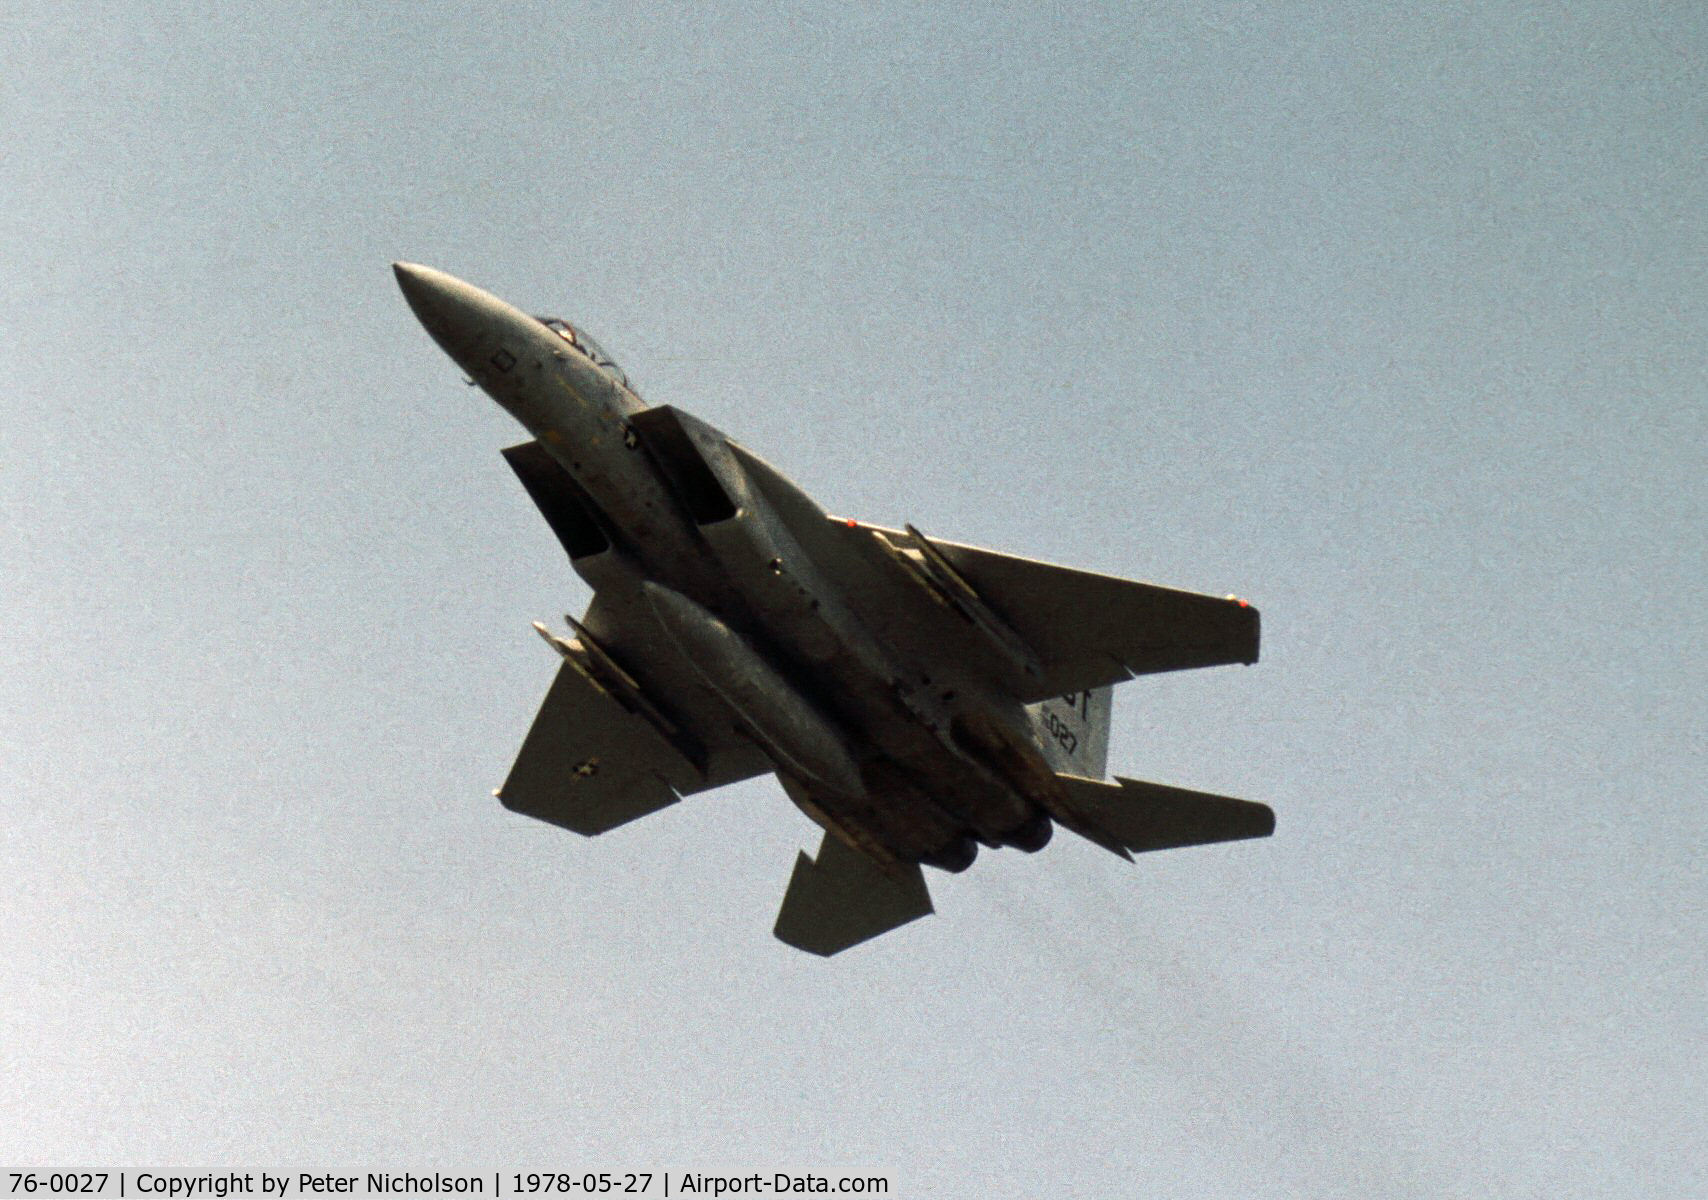 76-0027, 1976 McDonnell Douglas F-15A Eagle C/N 0207/A179, This Bitburg based F-15A Eagle of the 53rd Tactical Fighter Squadron/36th Tactical Fighter Wing displayed at the 1978 Bassingbourn Airshow.